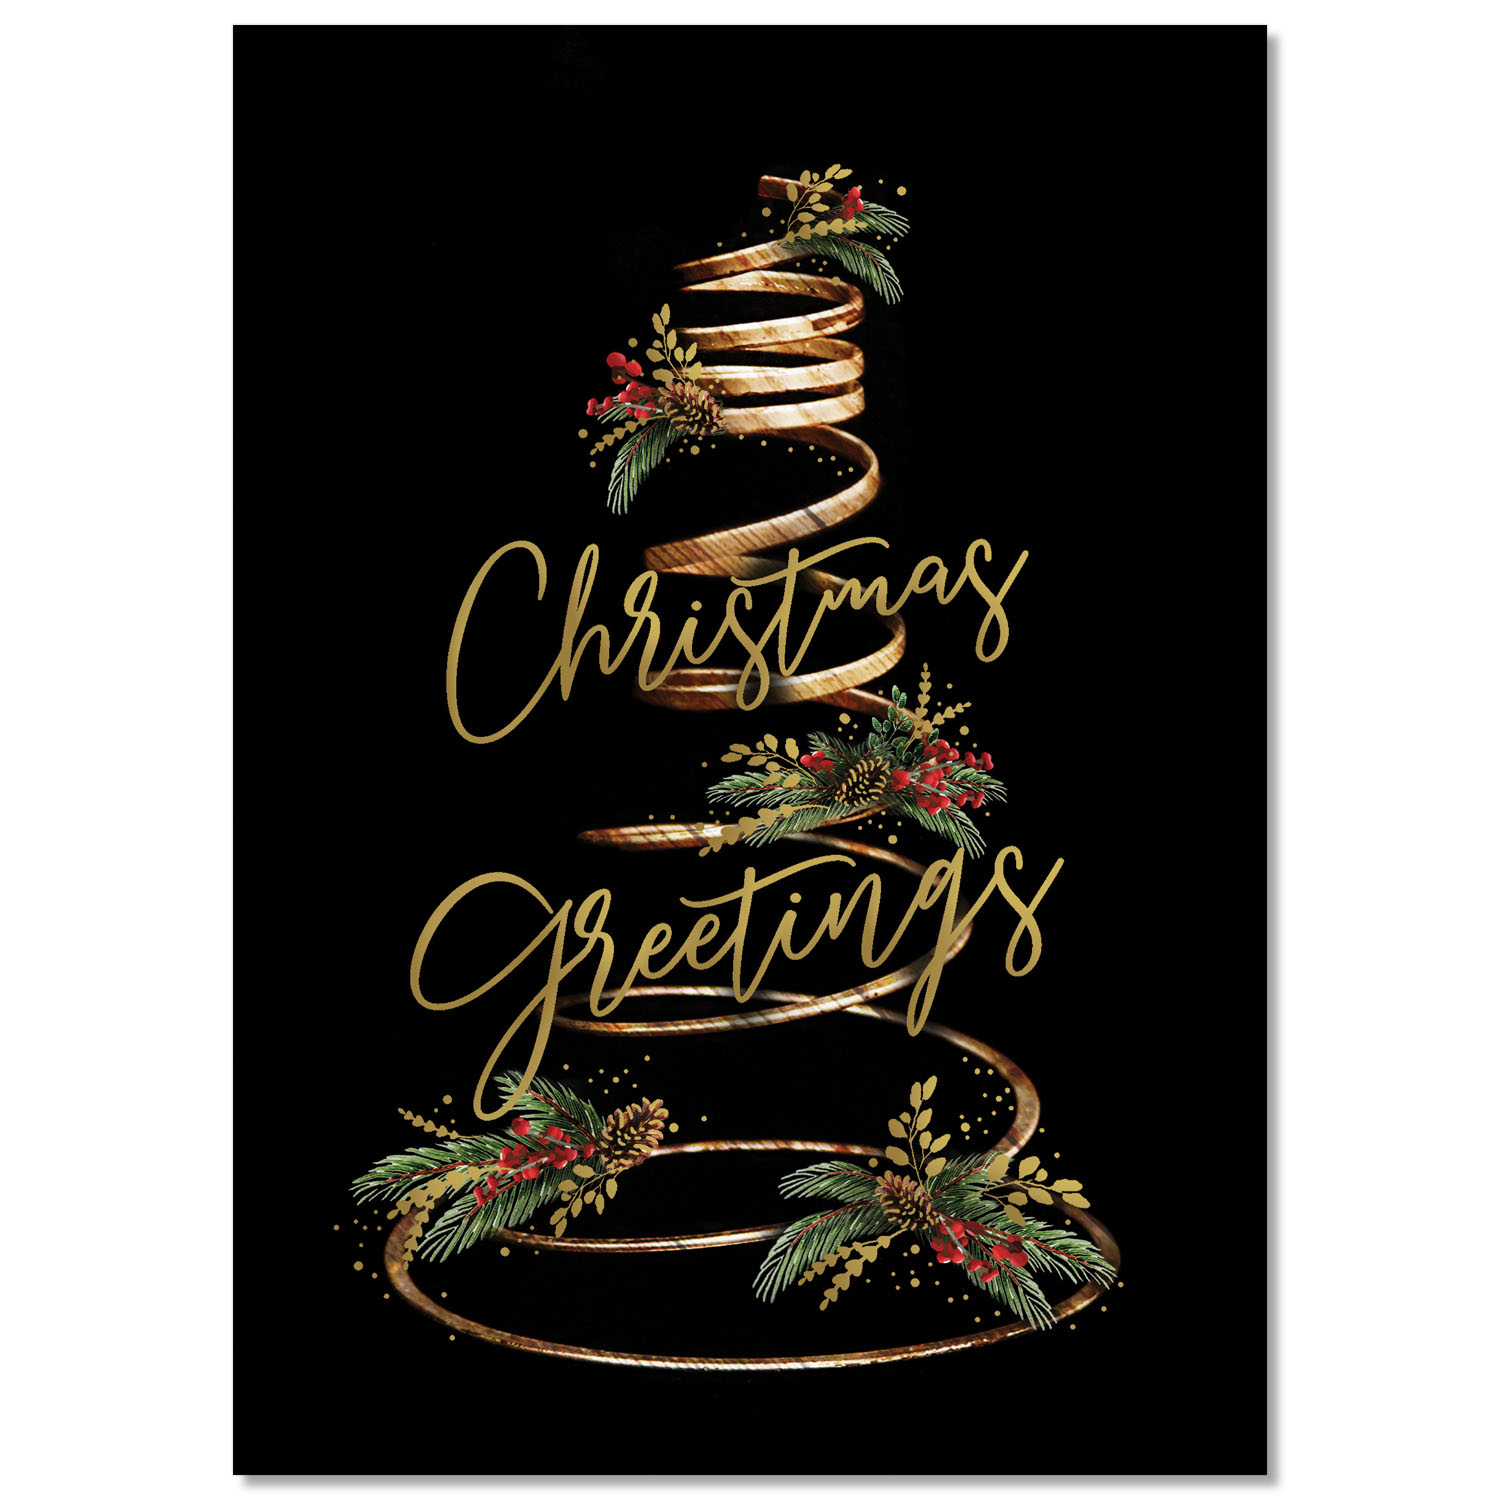 Coiled Tree Greetings Holiday Card